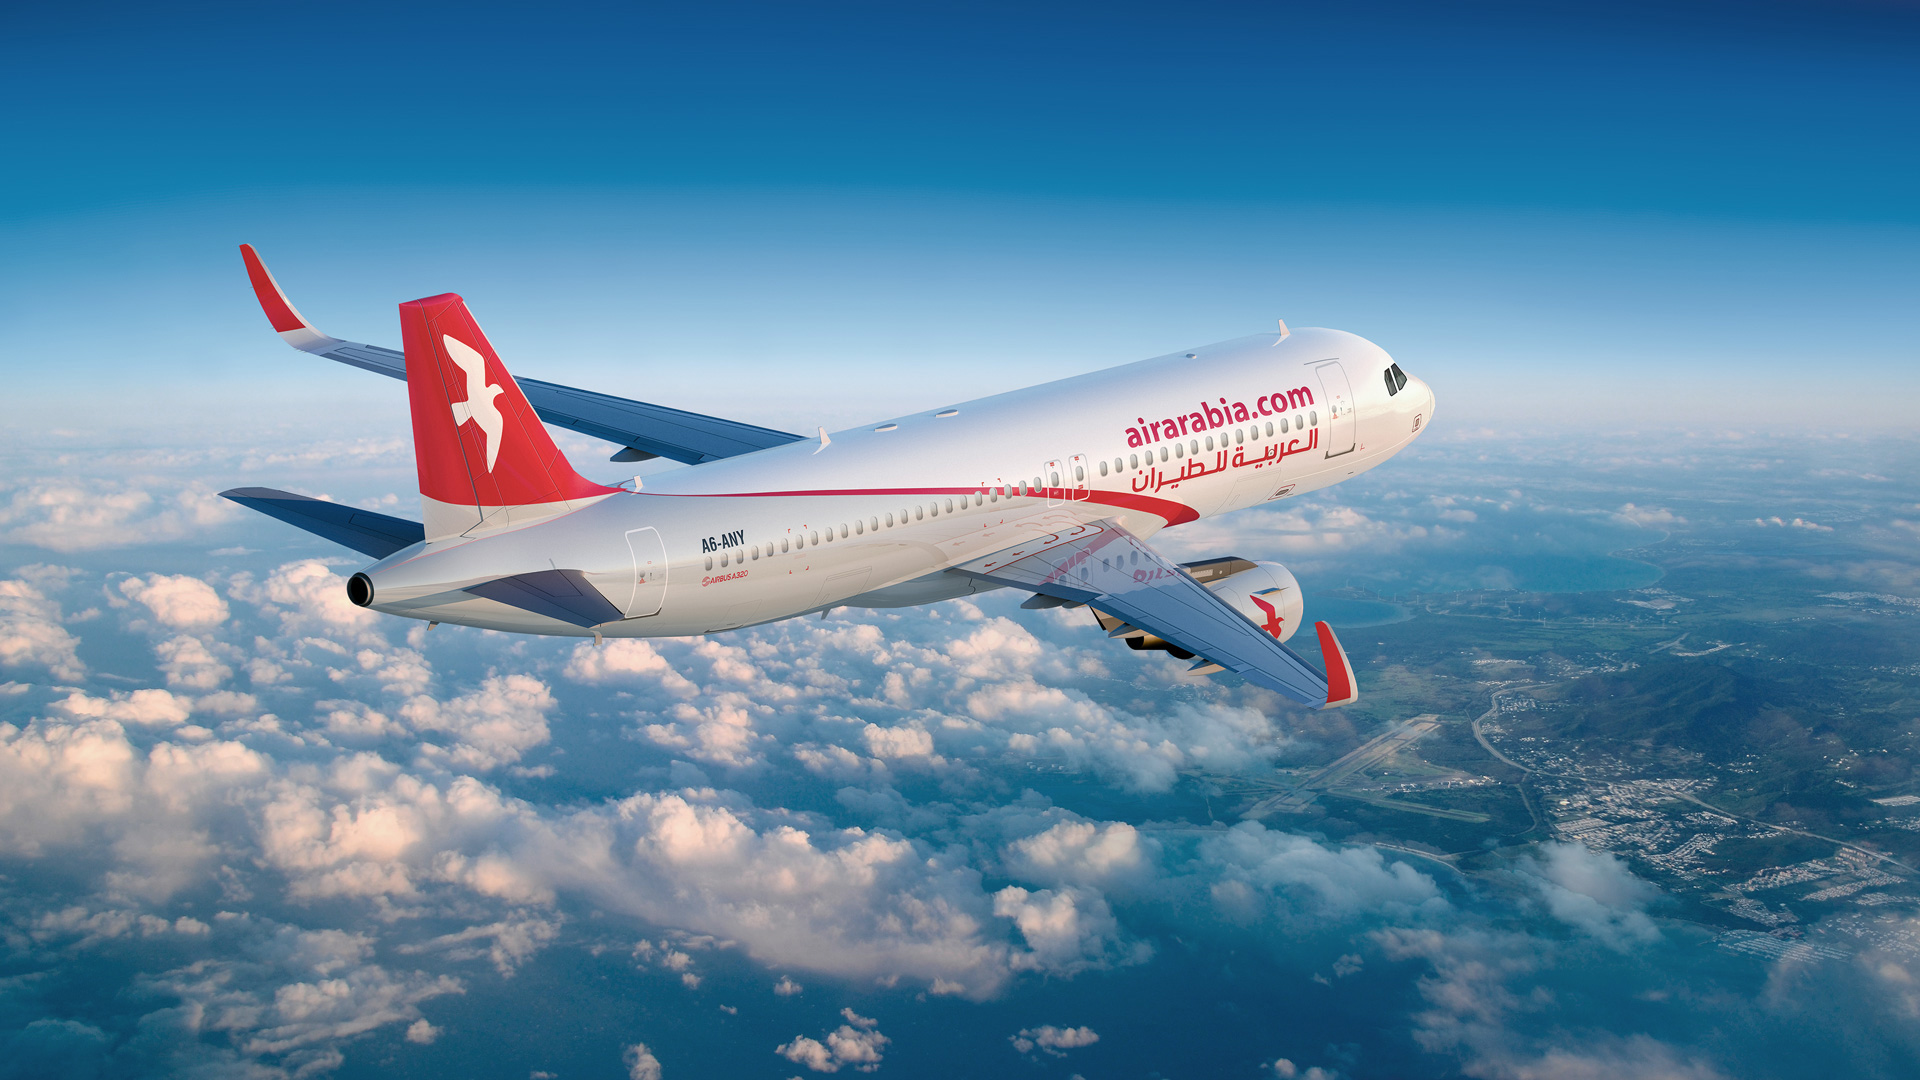 New Logo, Identity, and Livery for Air Arabia by Interbrand